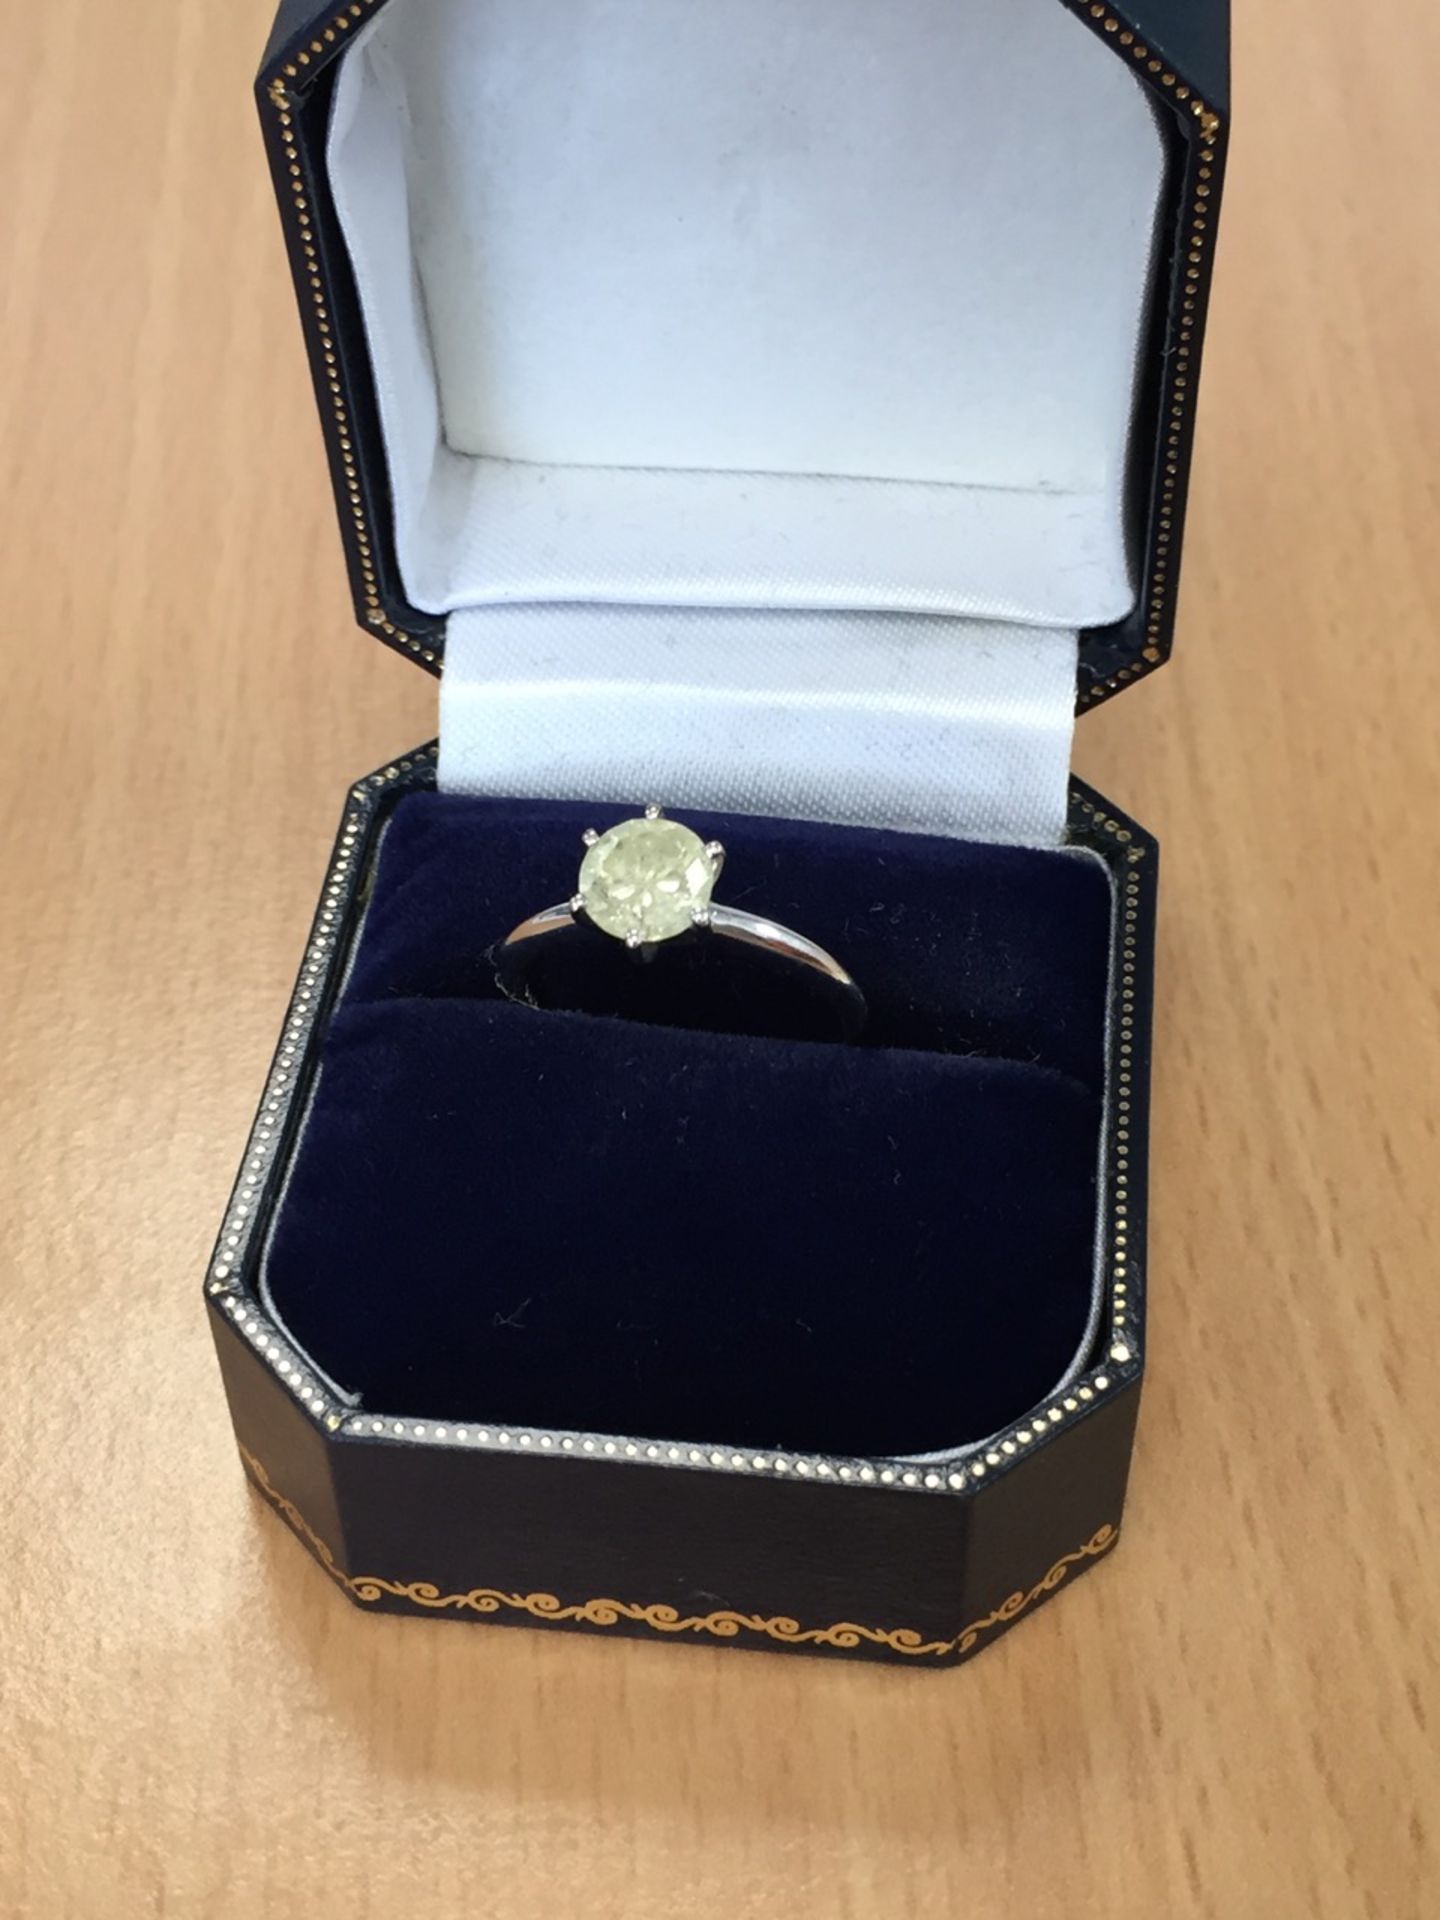 1.1 Carat Diamond - Solitaire Engagement Ring - Image 12 of 12